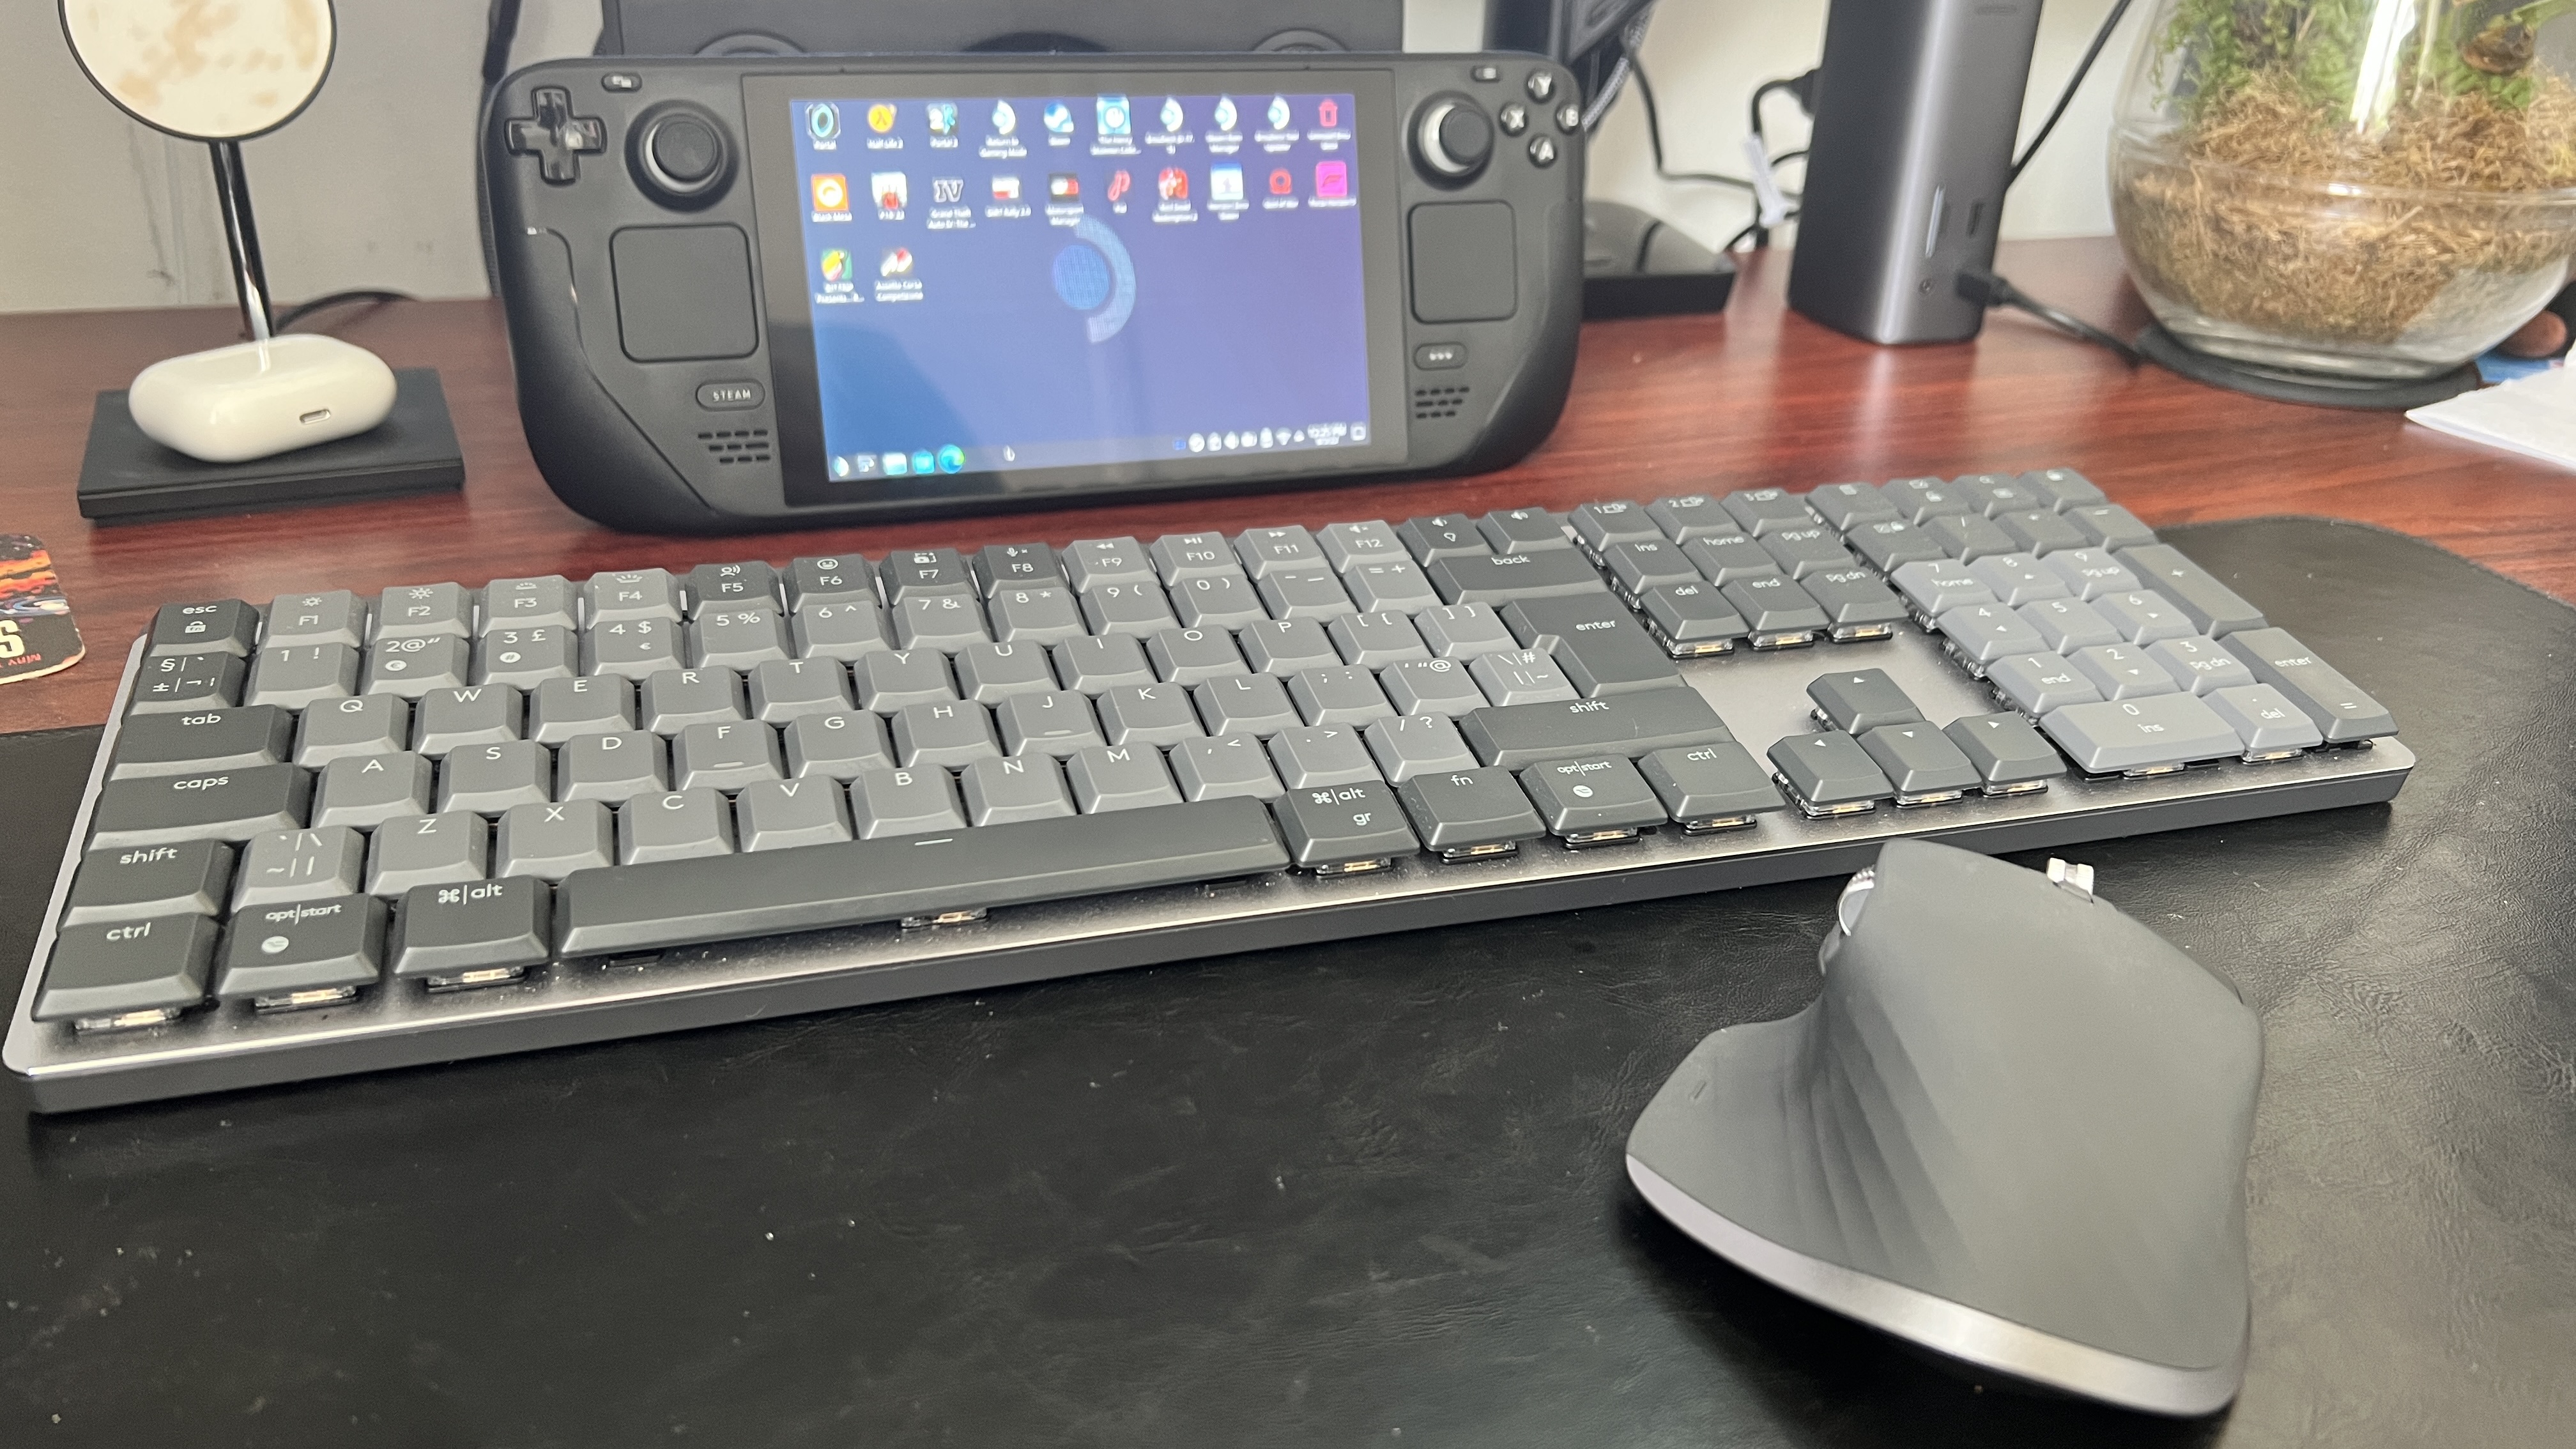 Steam desktop with keyboard and mouse